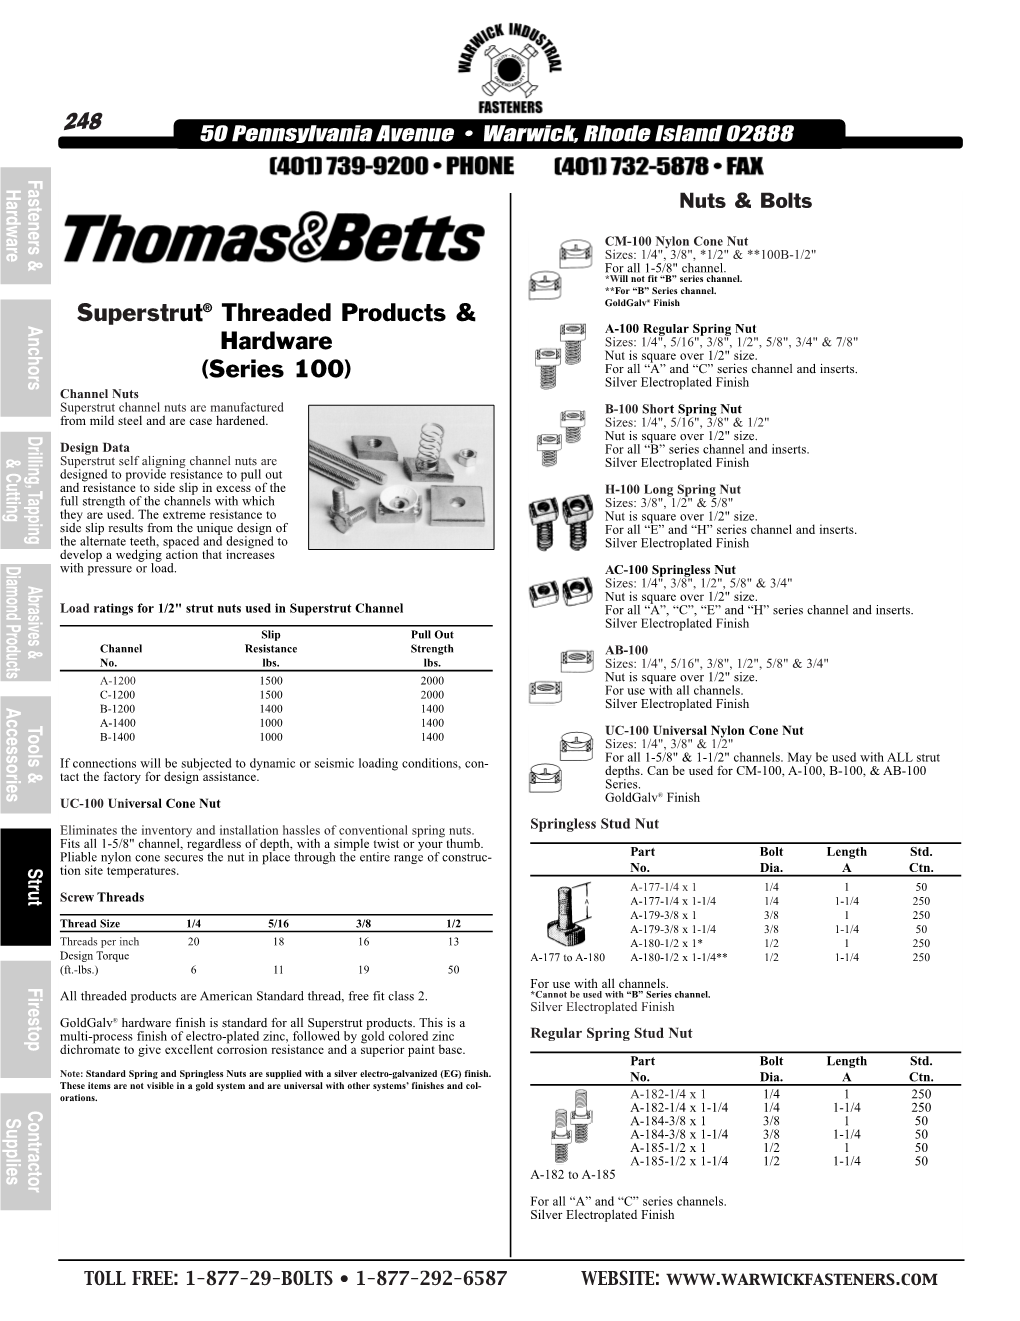 248 Superstrut® Threaded Products & Hardware (Series 100)